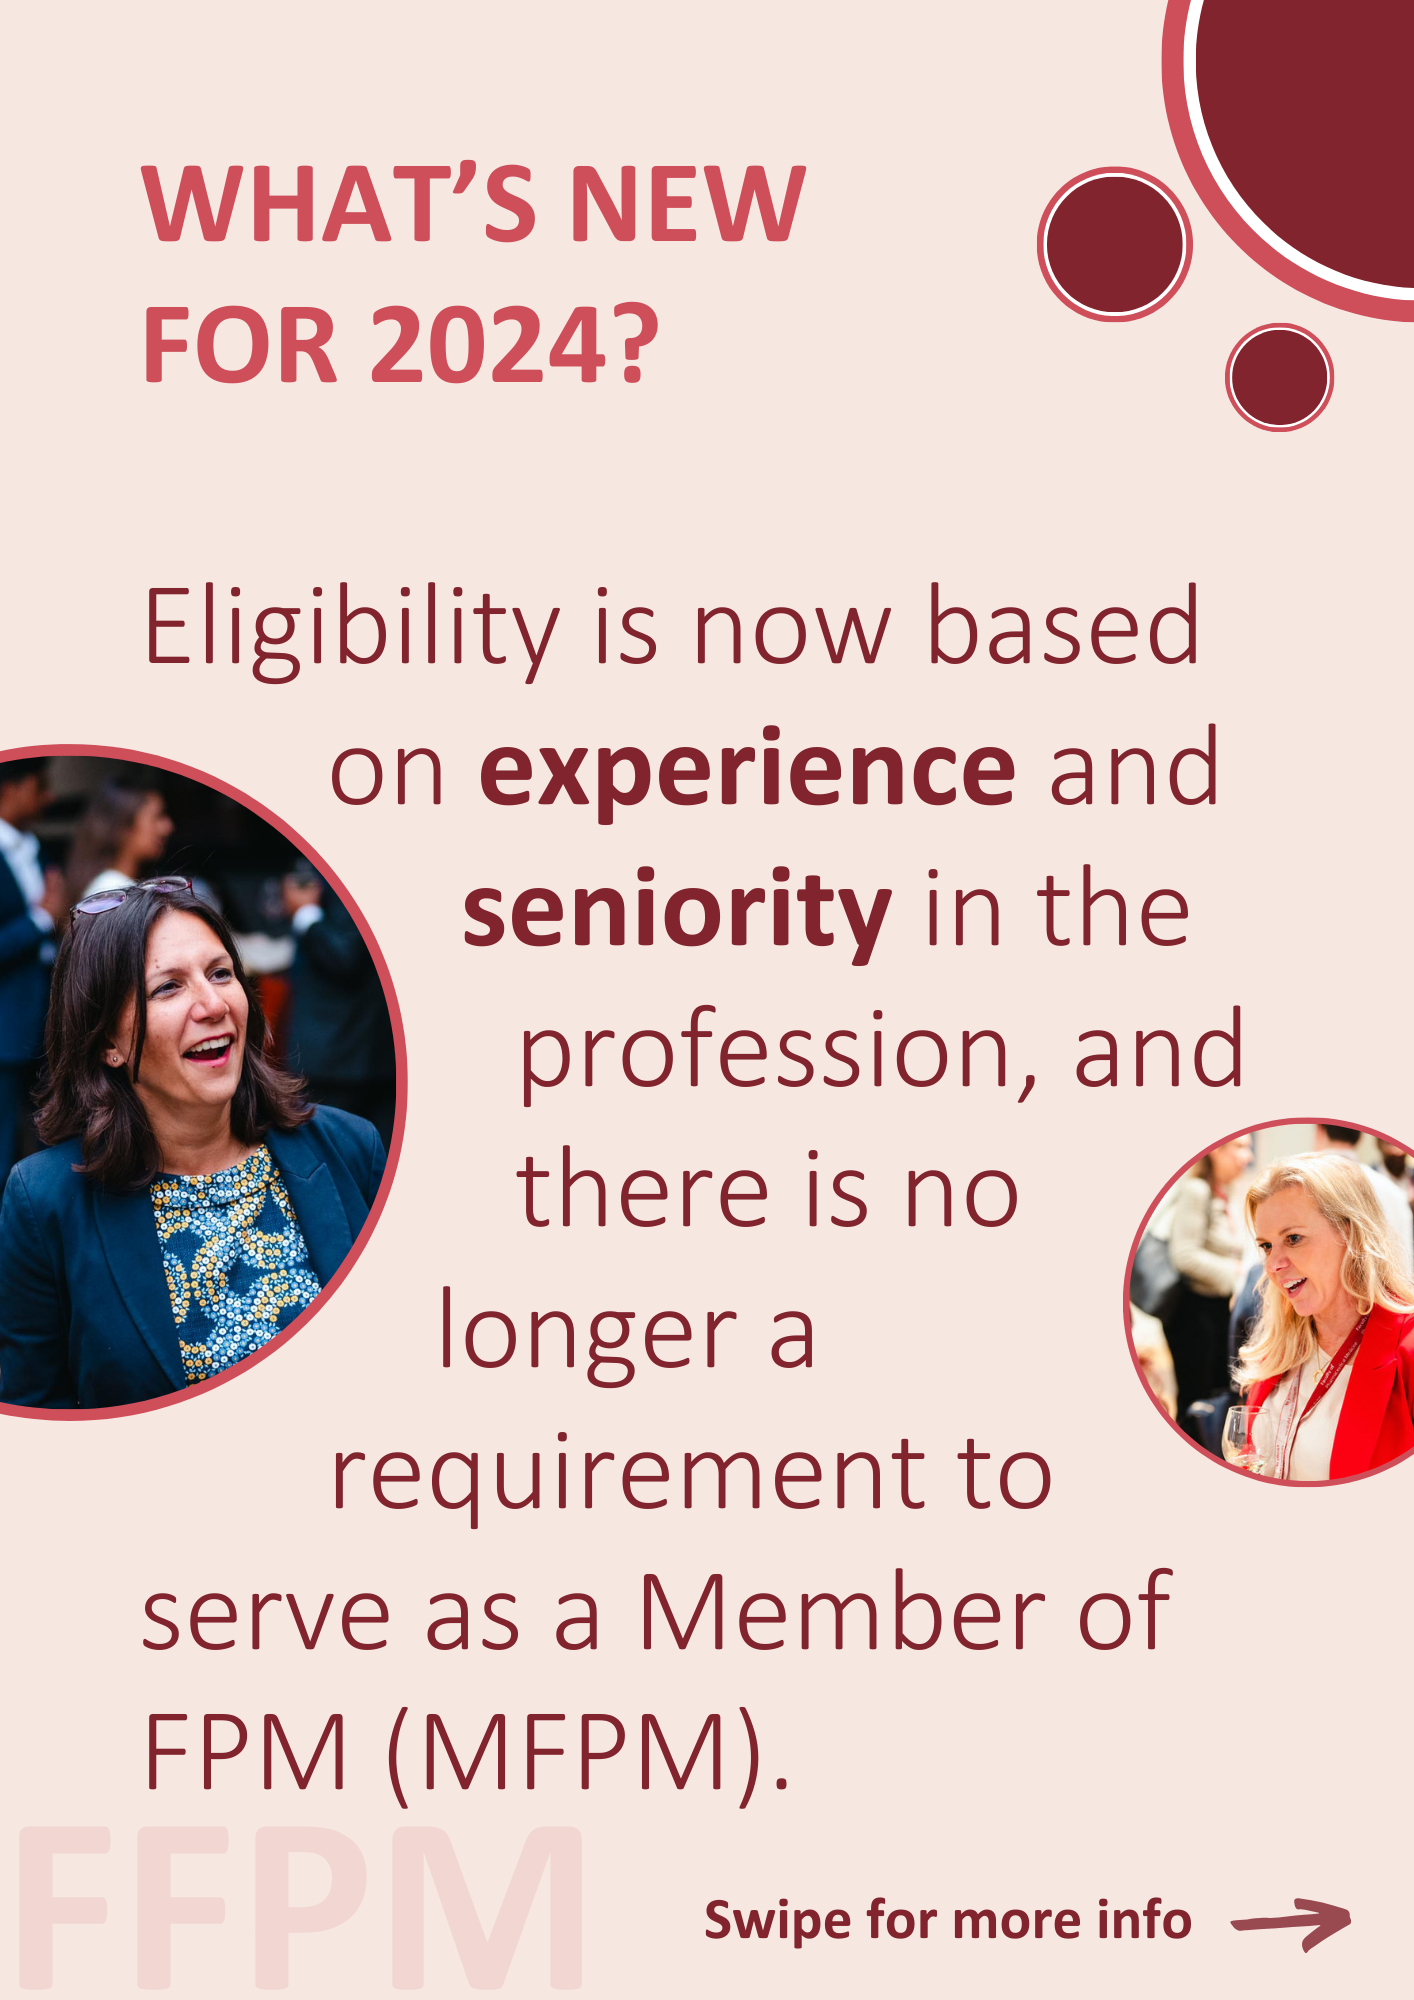 What's New for 2024? What’s new for 2024? Eligibility is now based on experience and seniority in the profession, and there is no longer a requirement to serve as a Member of FPM (MFPM).